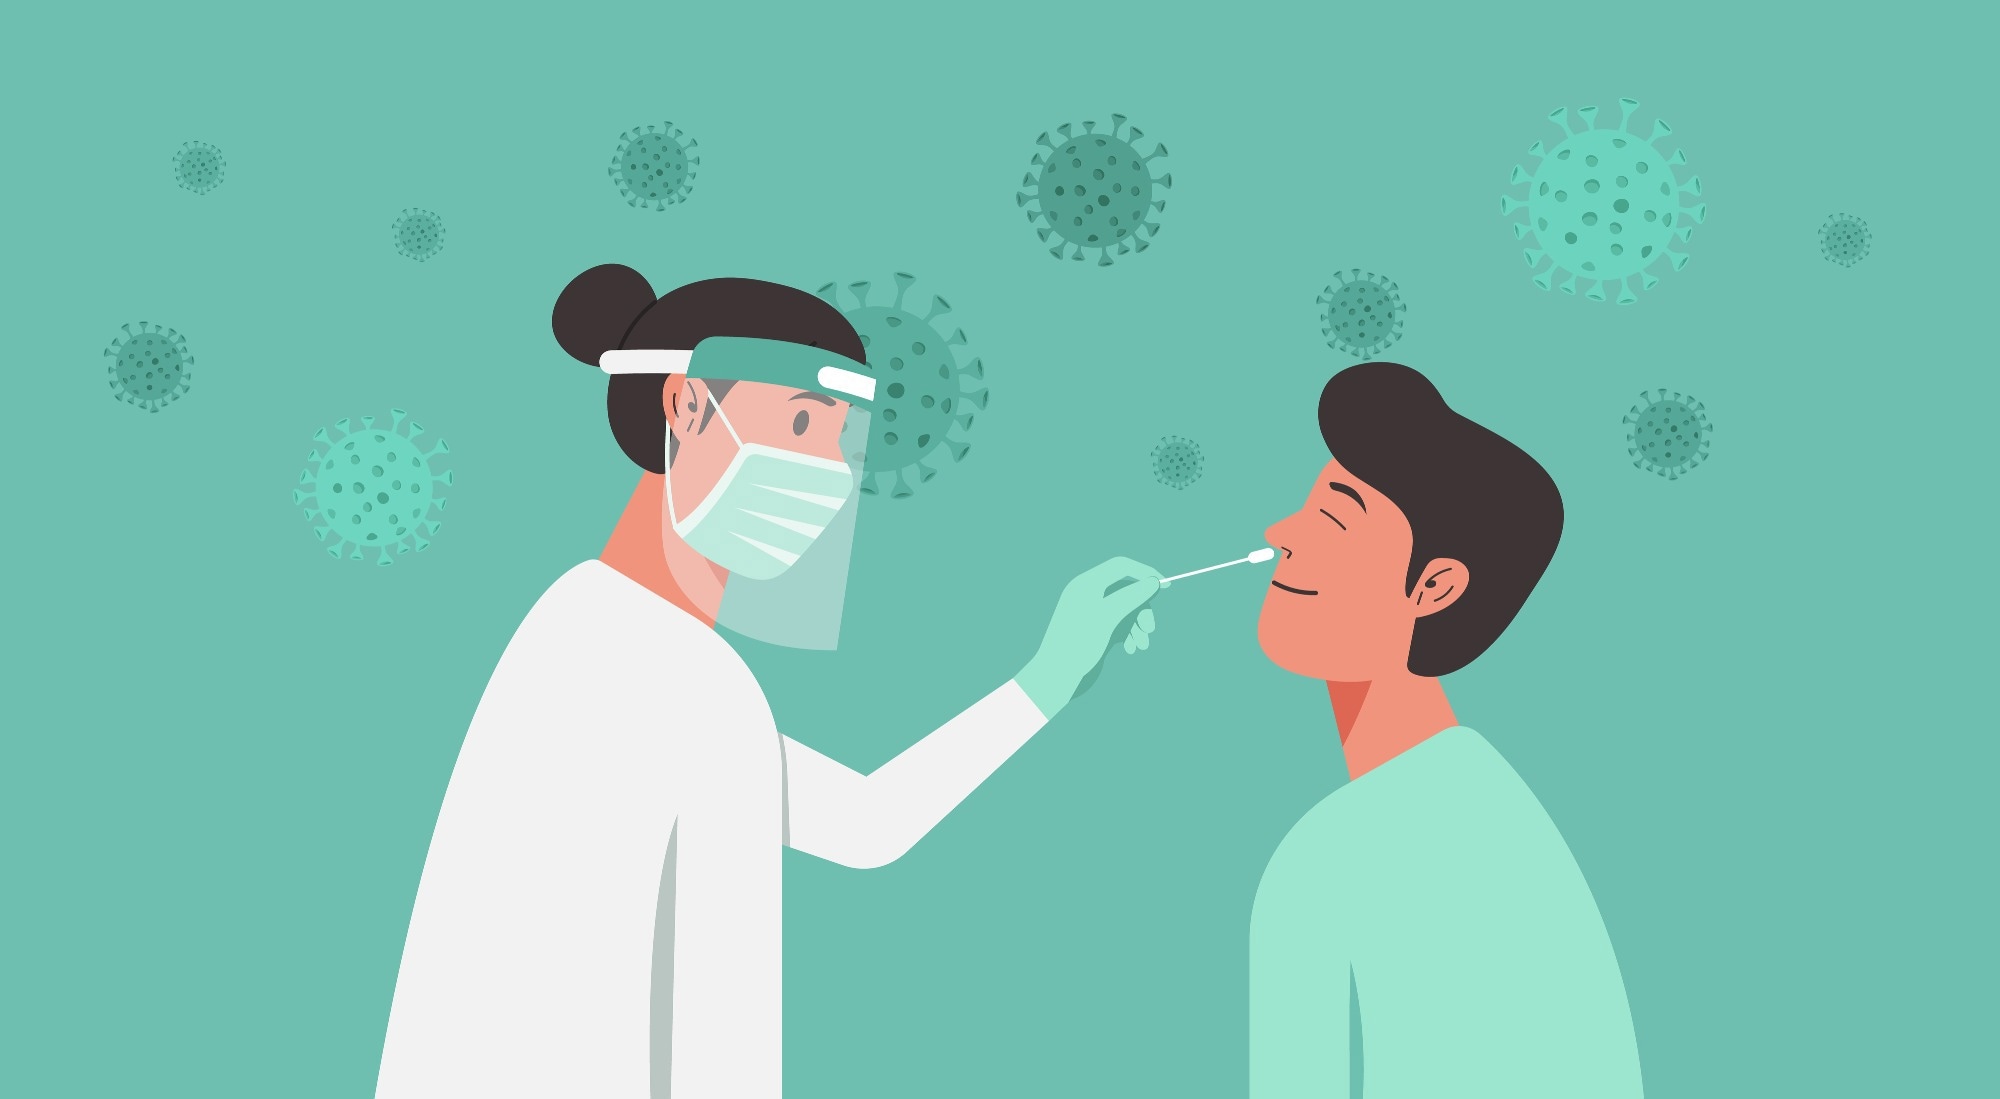 Study: Asymptomatic screening for severe acute respiratory coronavirus virus 2 (SARS-CoV-2) as an infection prevention measure in healthcare facilities: Challenges and considerations. Image Credit: ST.art / Shutterstock